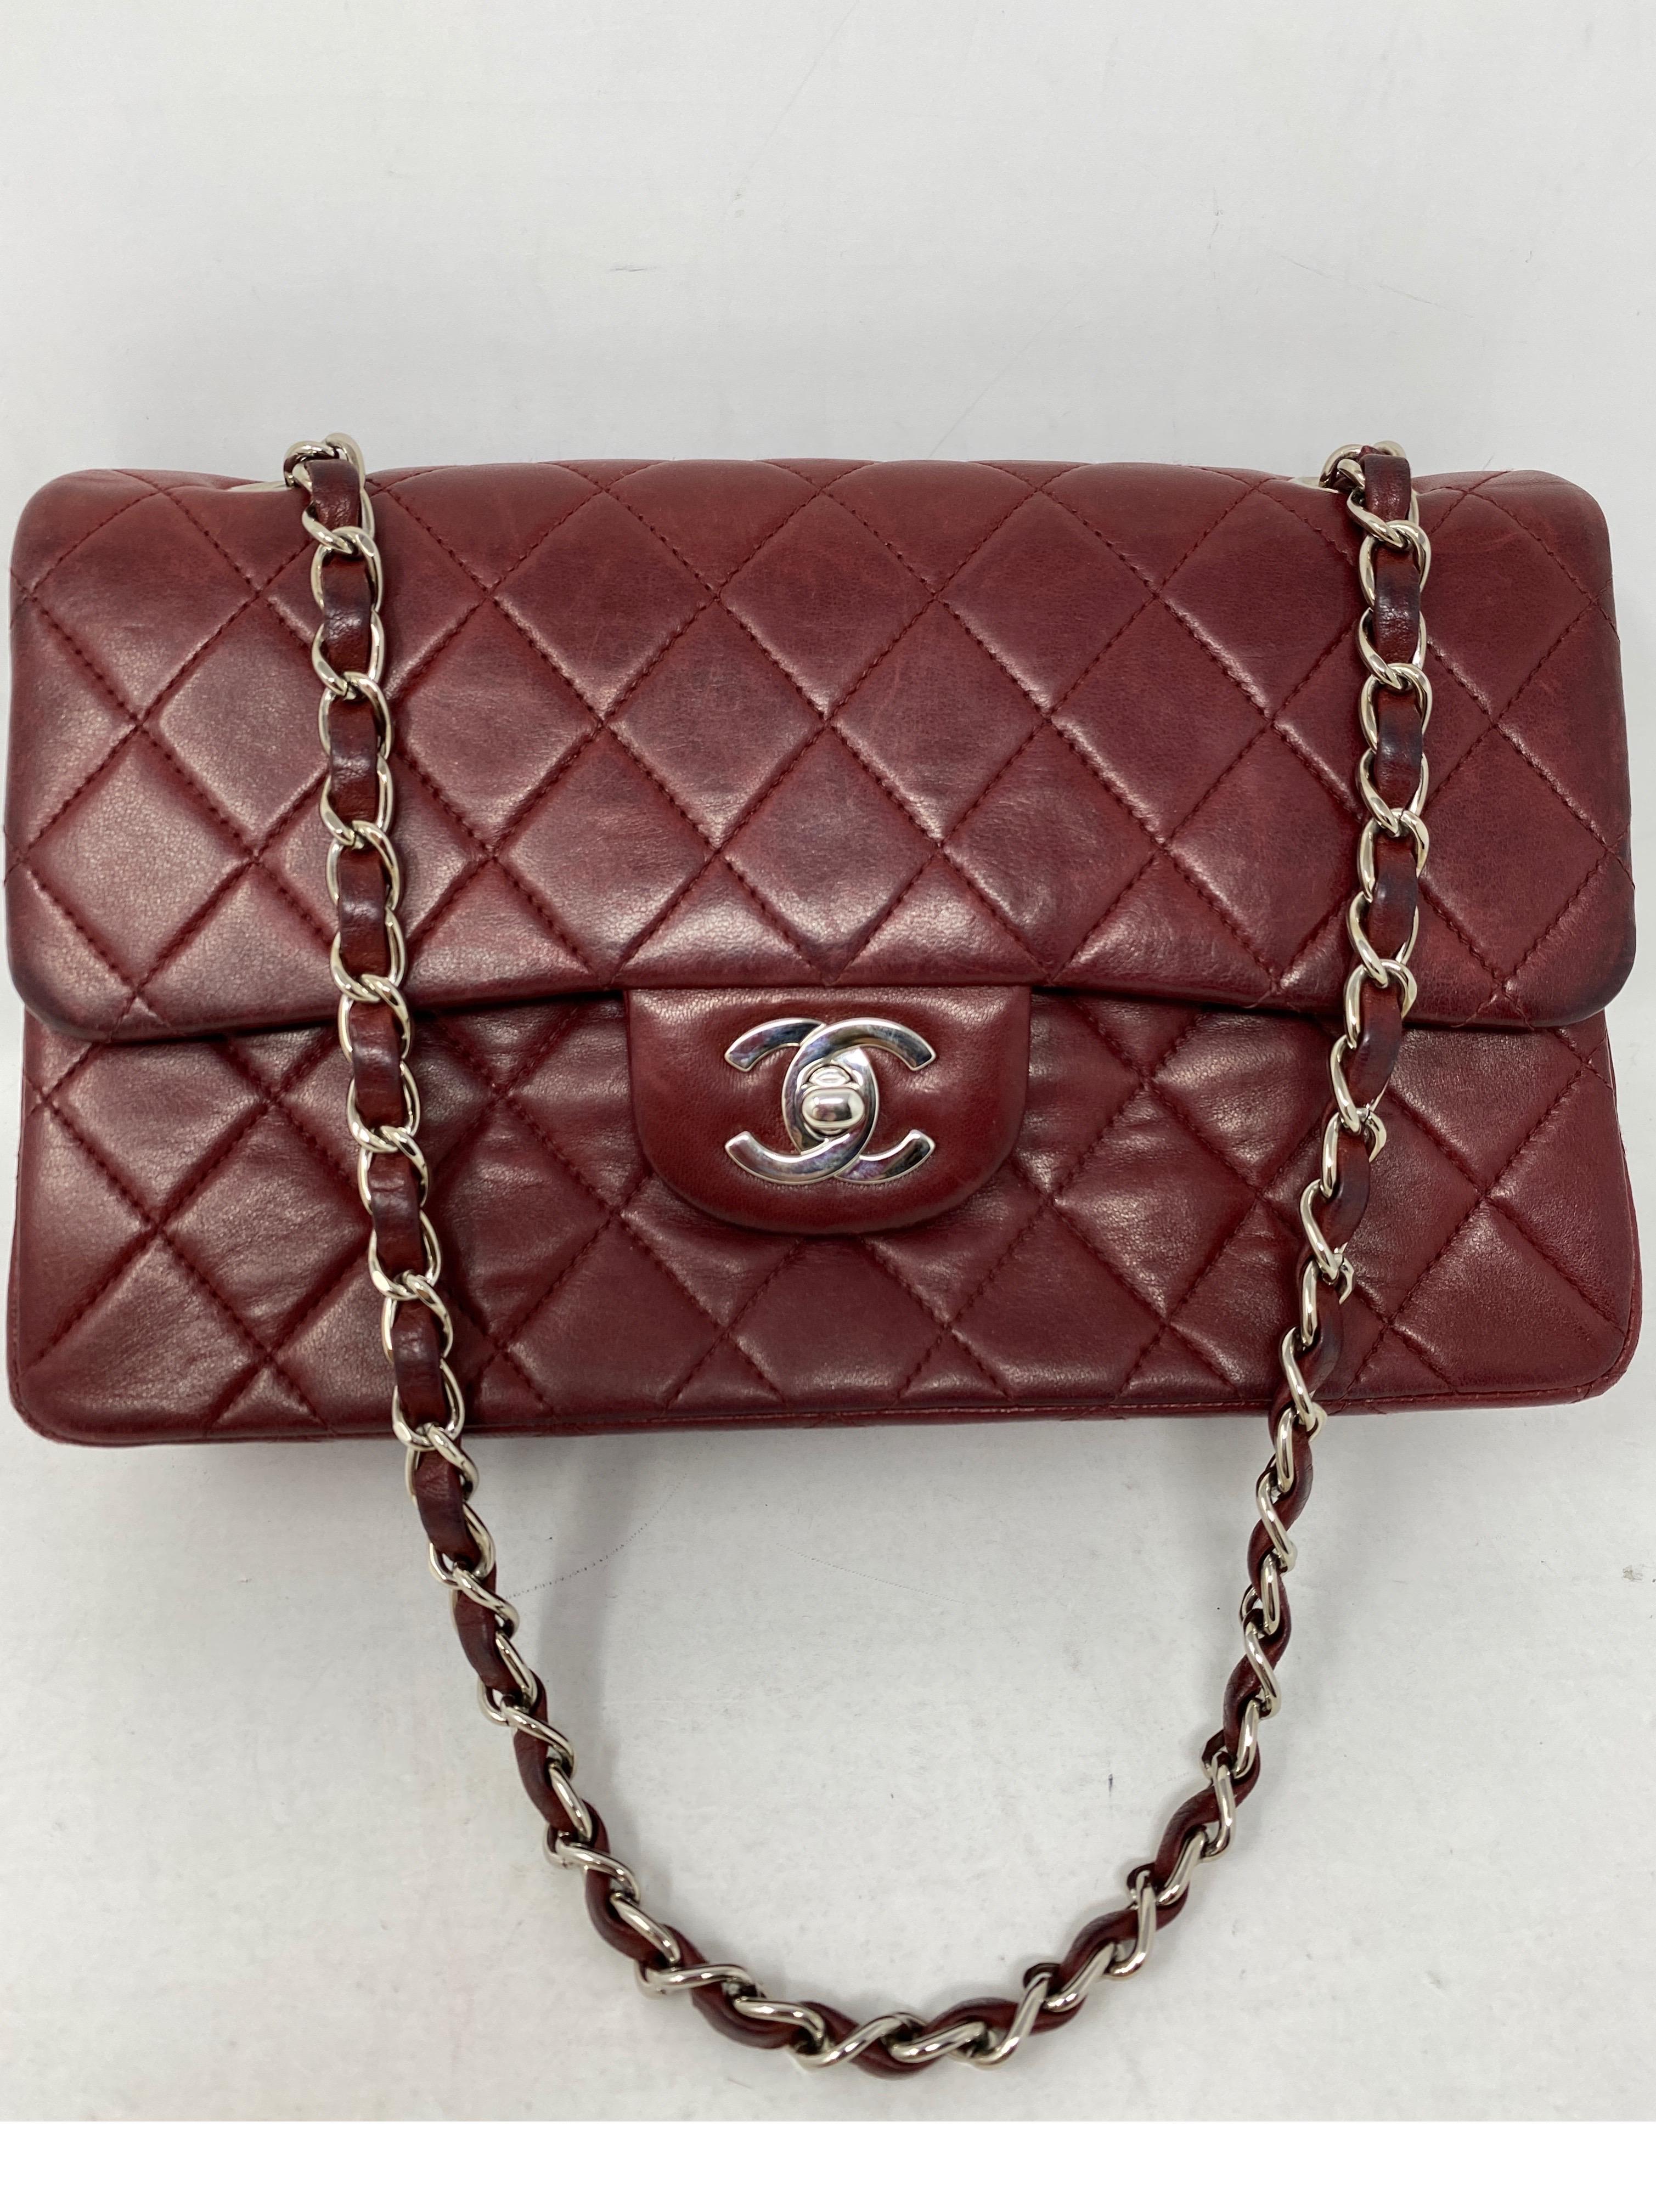 Chanel Burgundy Lambskin Small Double Flap Bag. Dark red/ burgundy color bag. Has wear but lots of life left. Can be sent in for a spa treatment. Looks nice distressed. Please check all photos. Silver hardware. Hard to find size. Includes